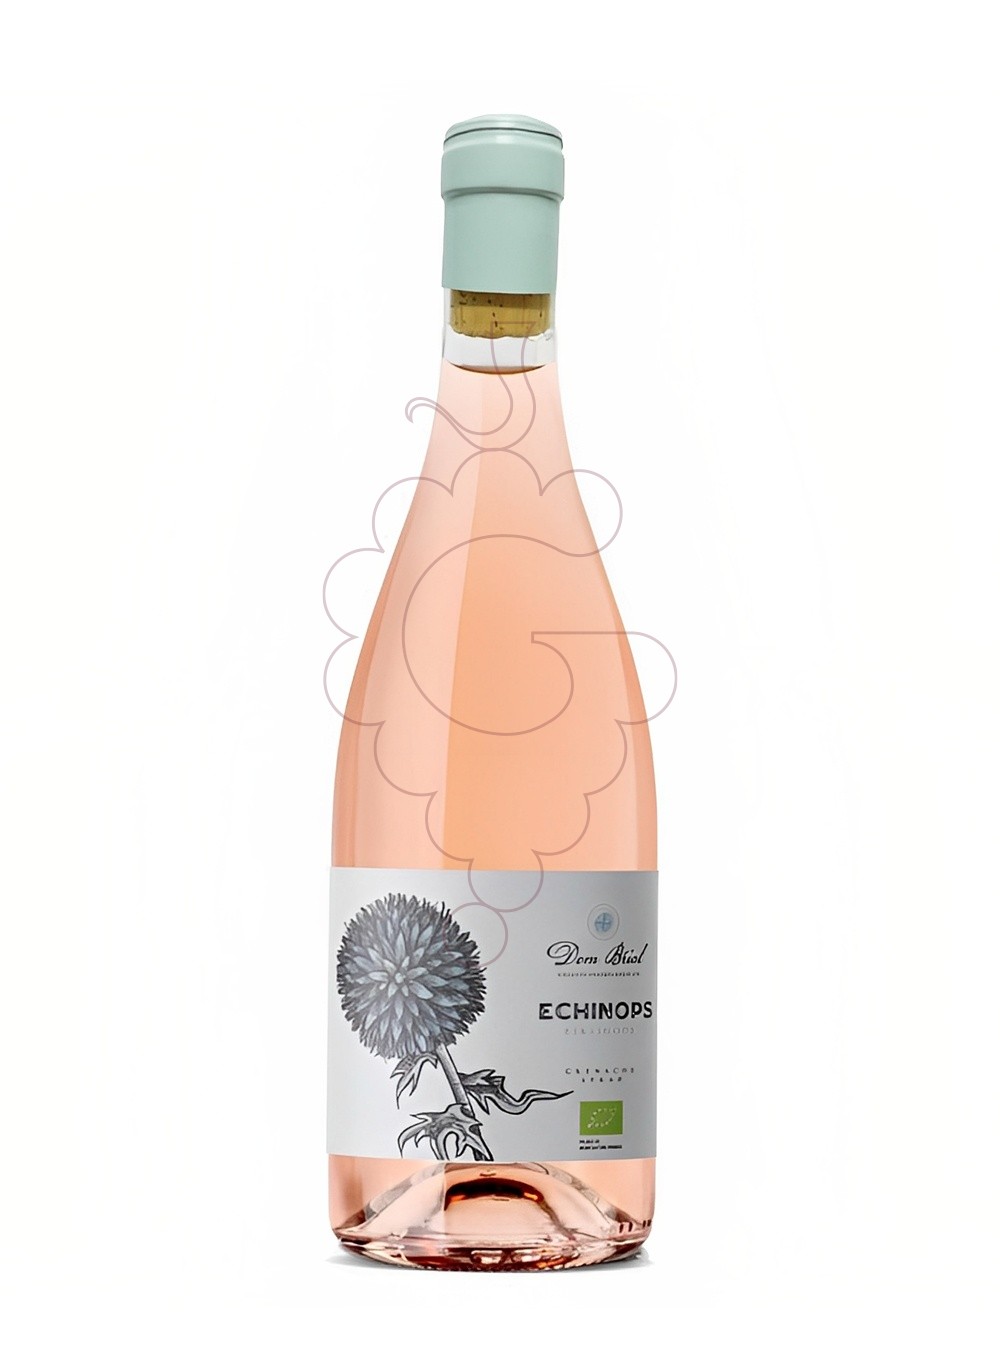 Photo Echinops dom brial rose 75 cl rosé wine